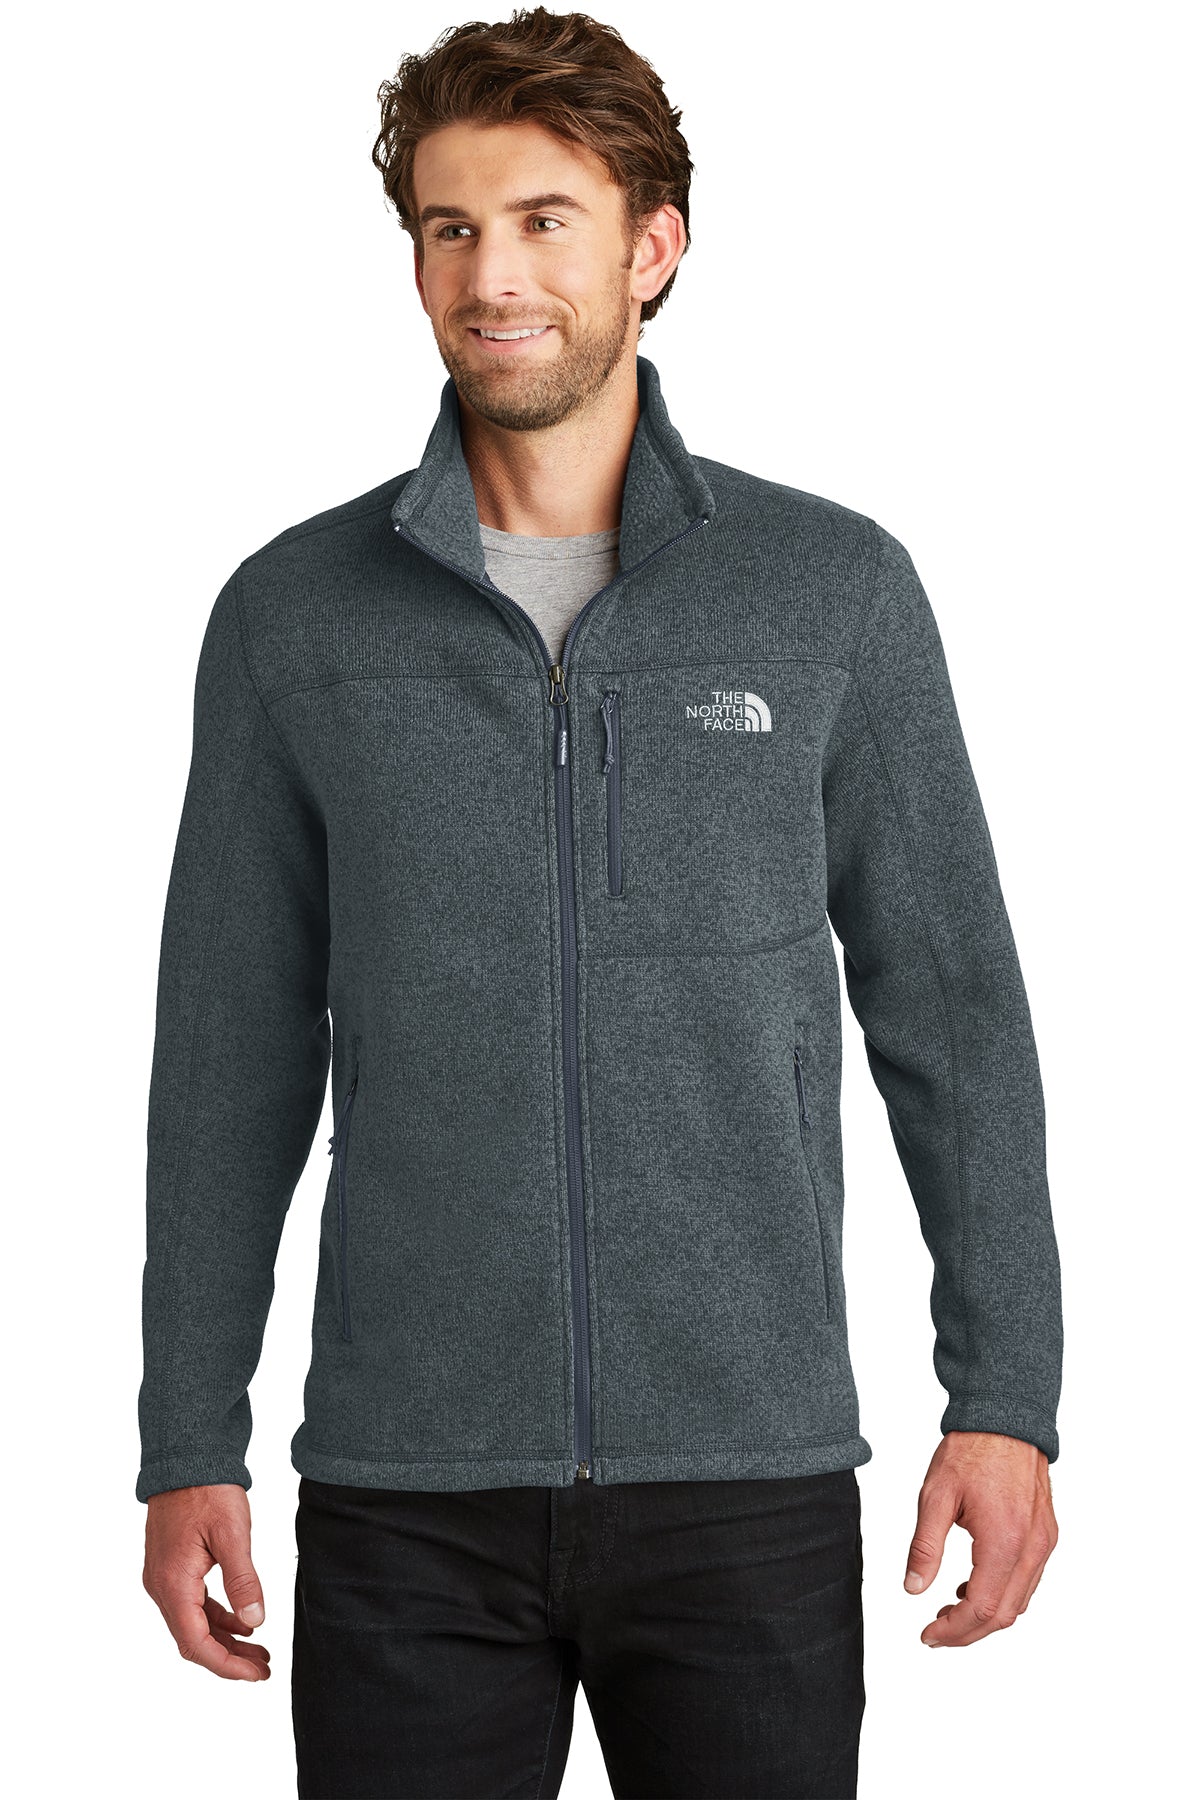 The North Face Sweater Fleece Jacket-5